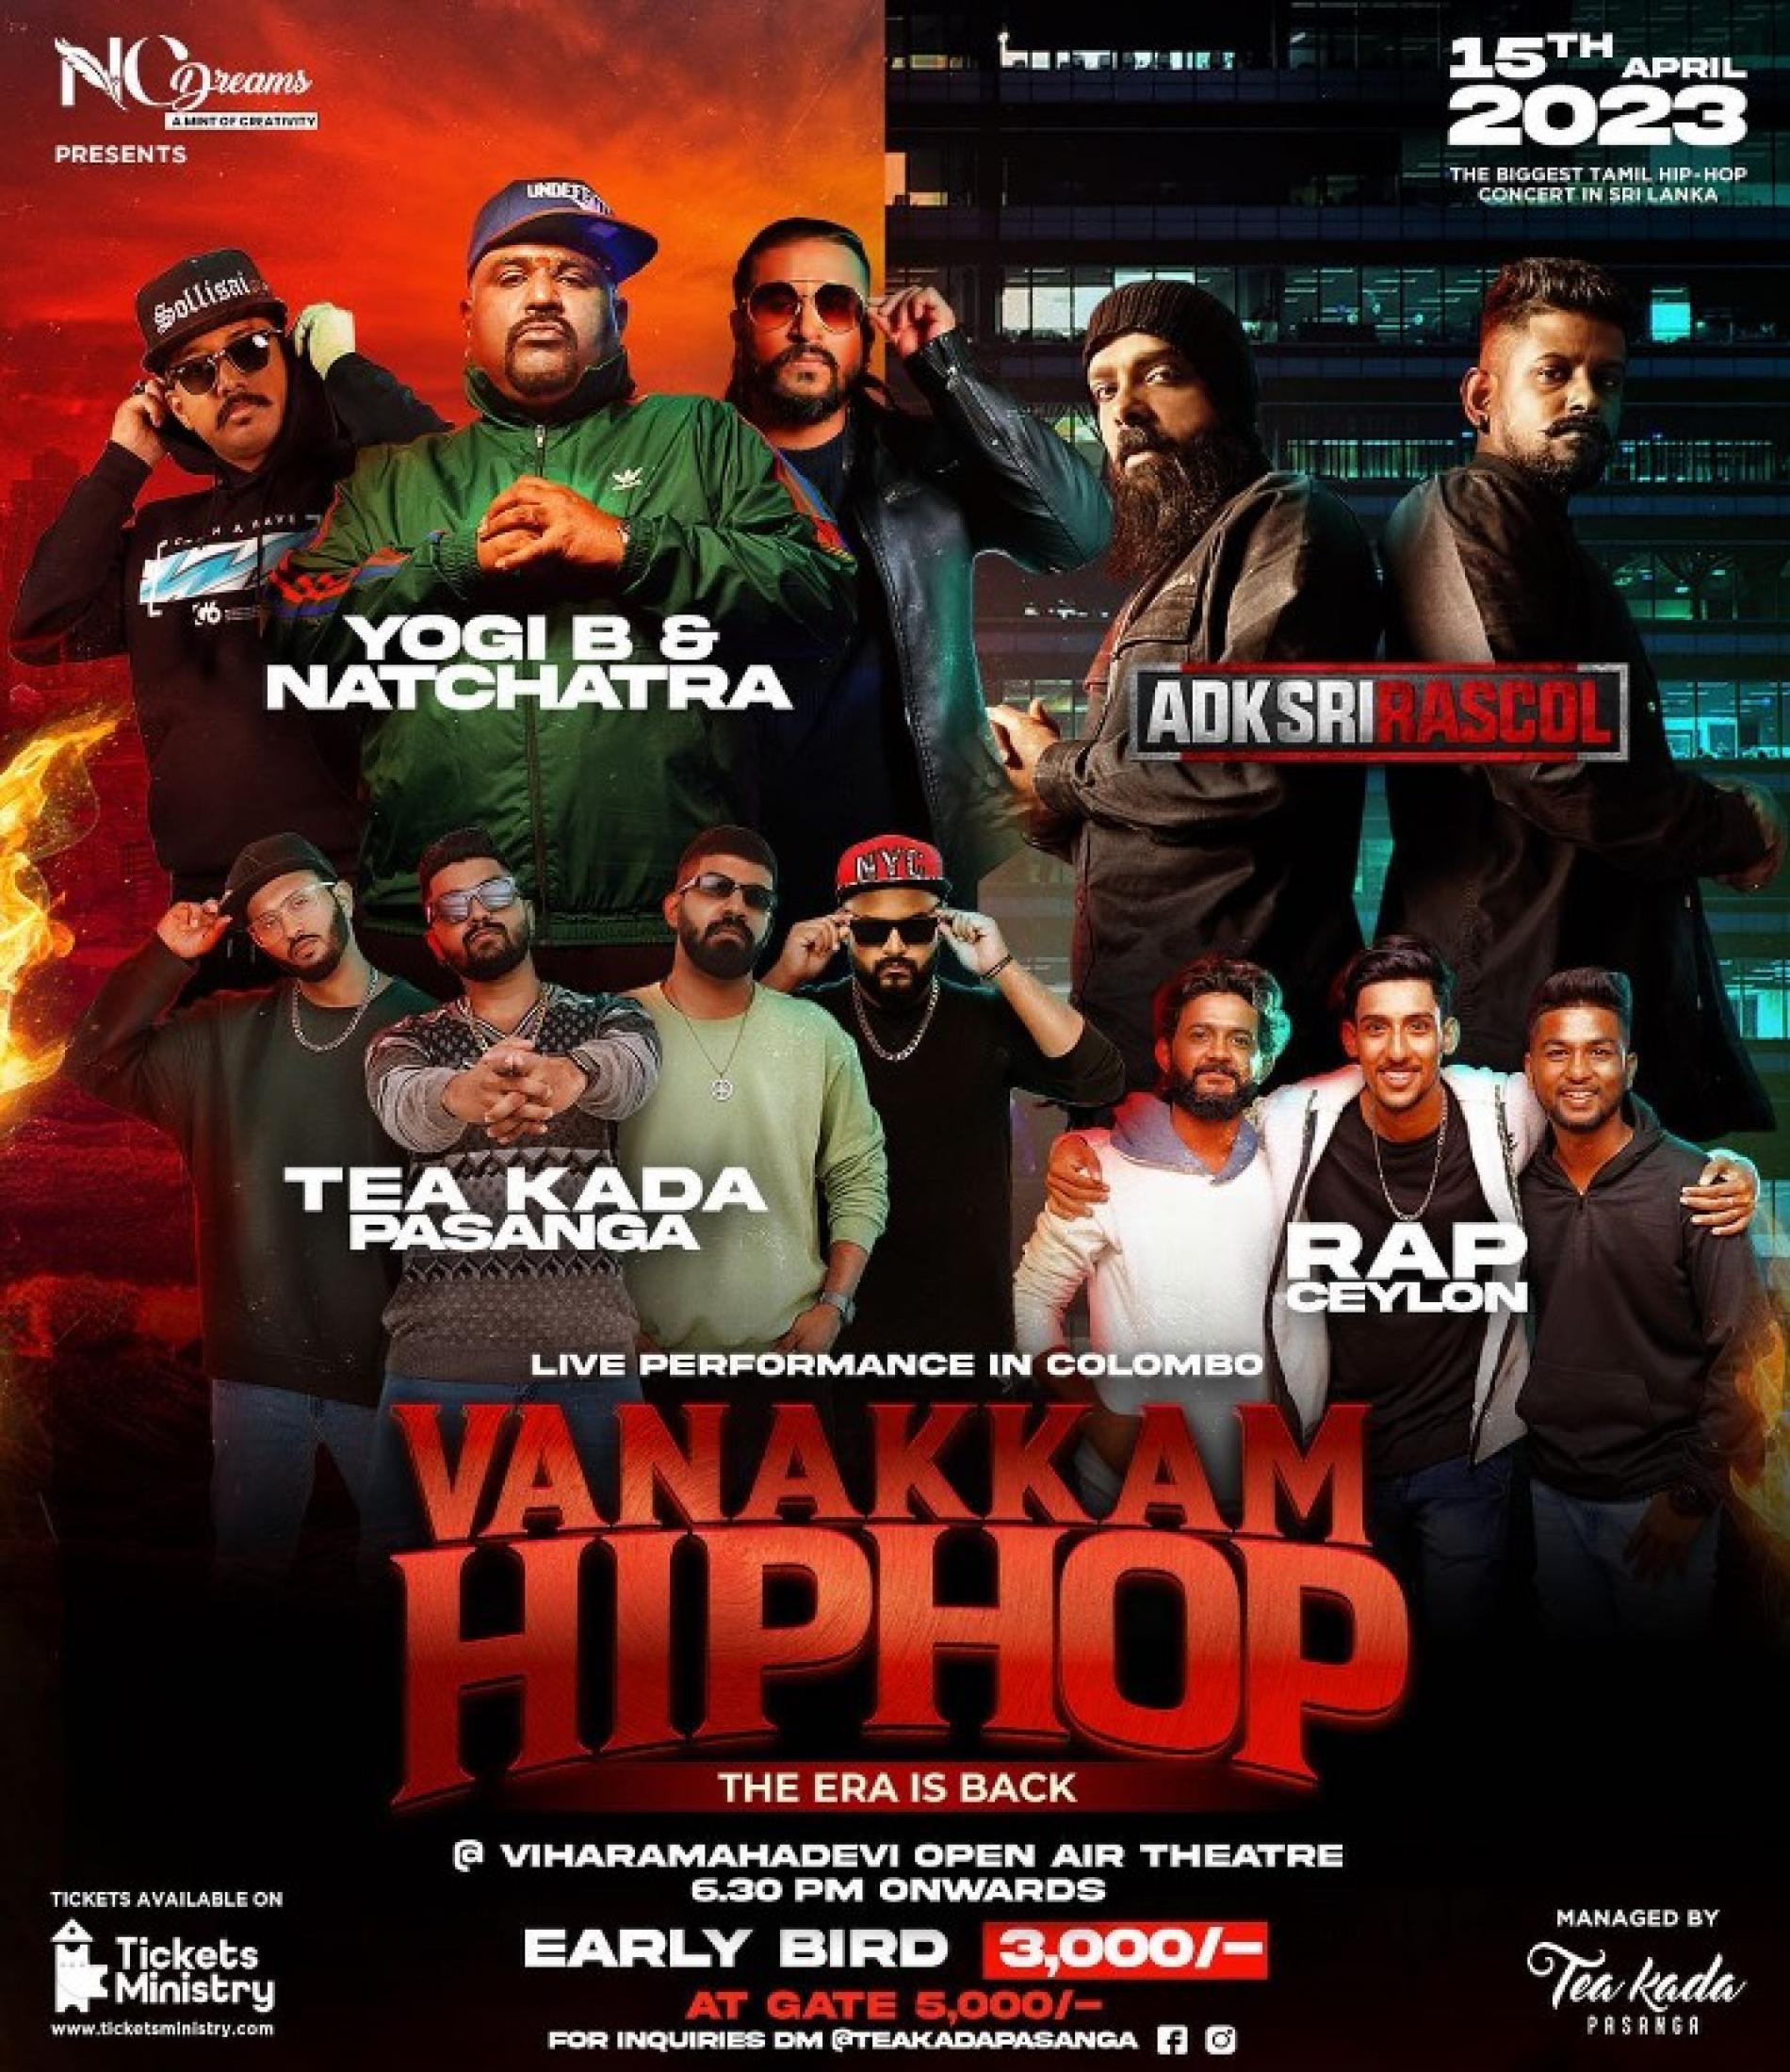 News : The Biggest Tamil Hip Hop Concert Is On This April!